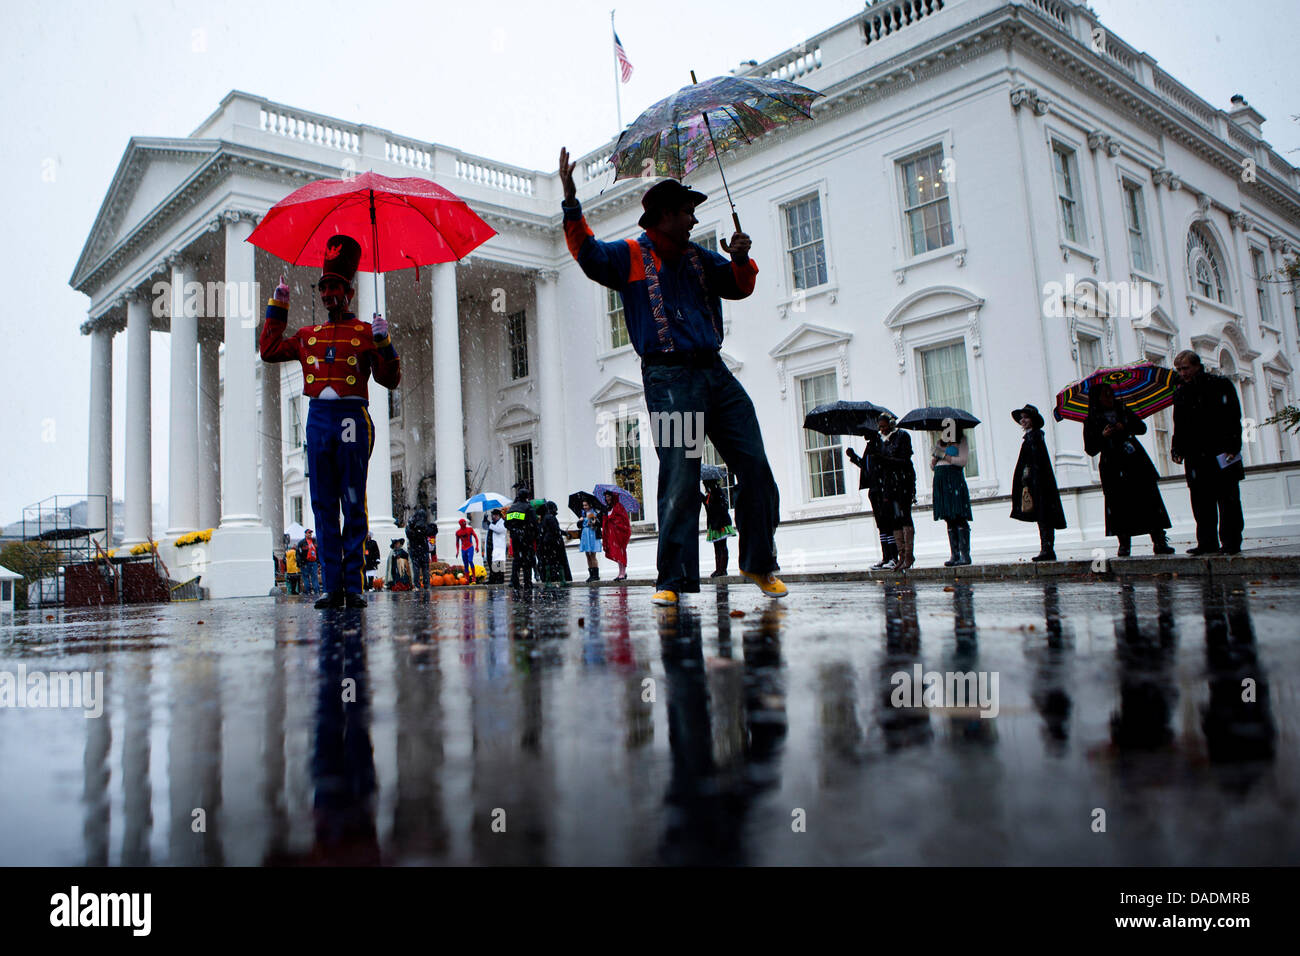 Actors, staff and volunteers wait to greet trick or treaters at the White House in Washington, D.C., Saturday, October 29, 2011. United States President Barack Obama and first lady Michelle Obama hosted military families and other trick or treaters for a Halloween party. .Credit: Brendan Smialowski / Pool via CNP Stock Photo